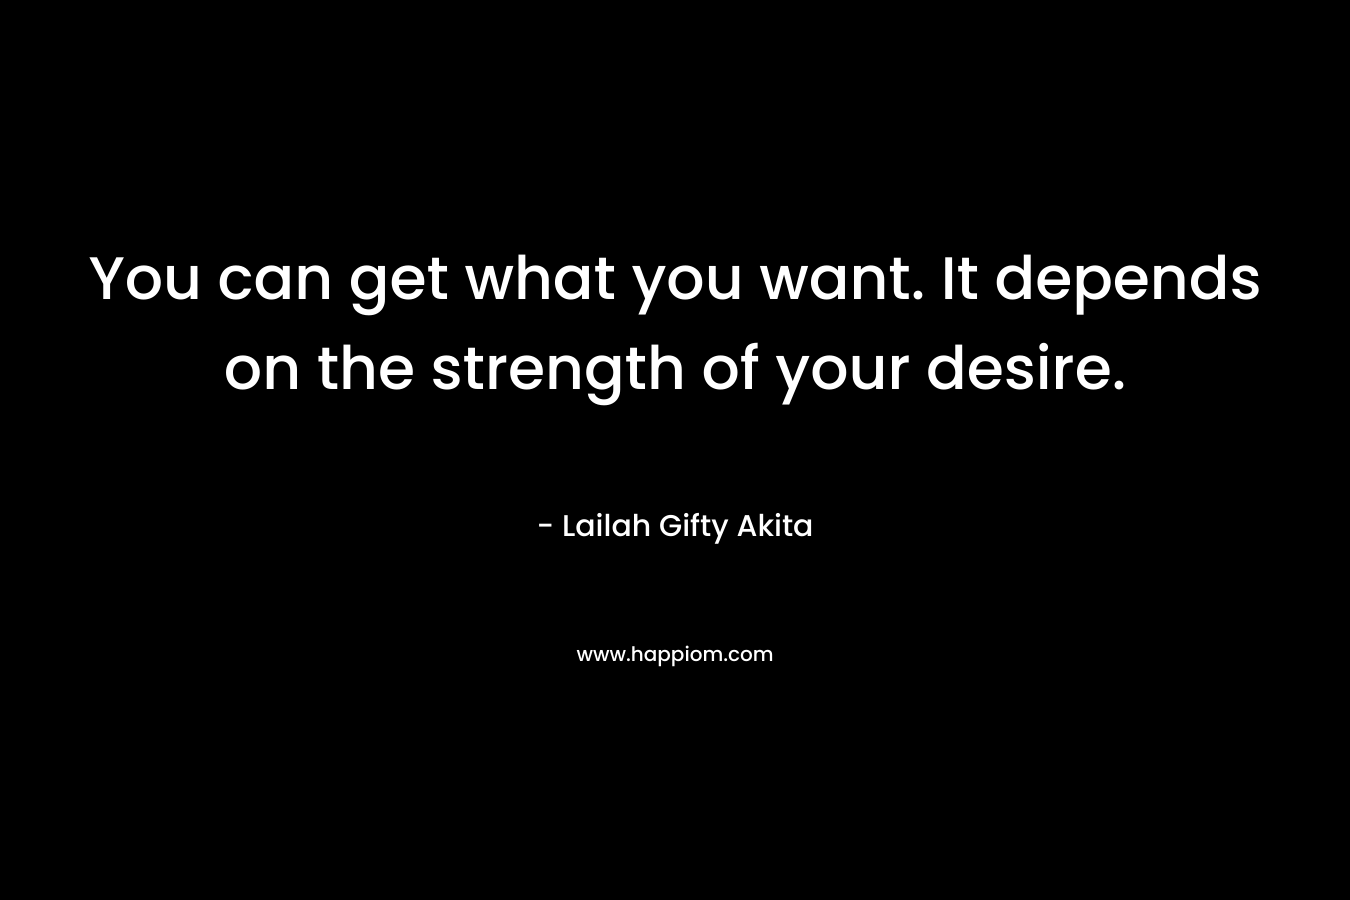 You can get what you want. It depends on the strength of your desire.